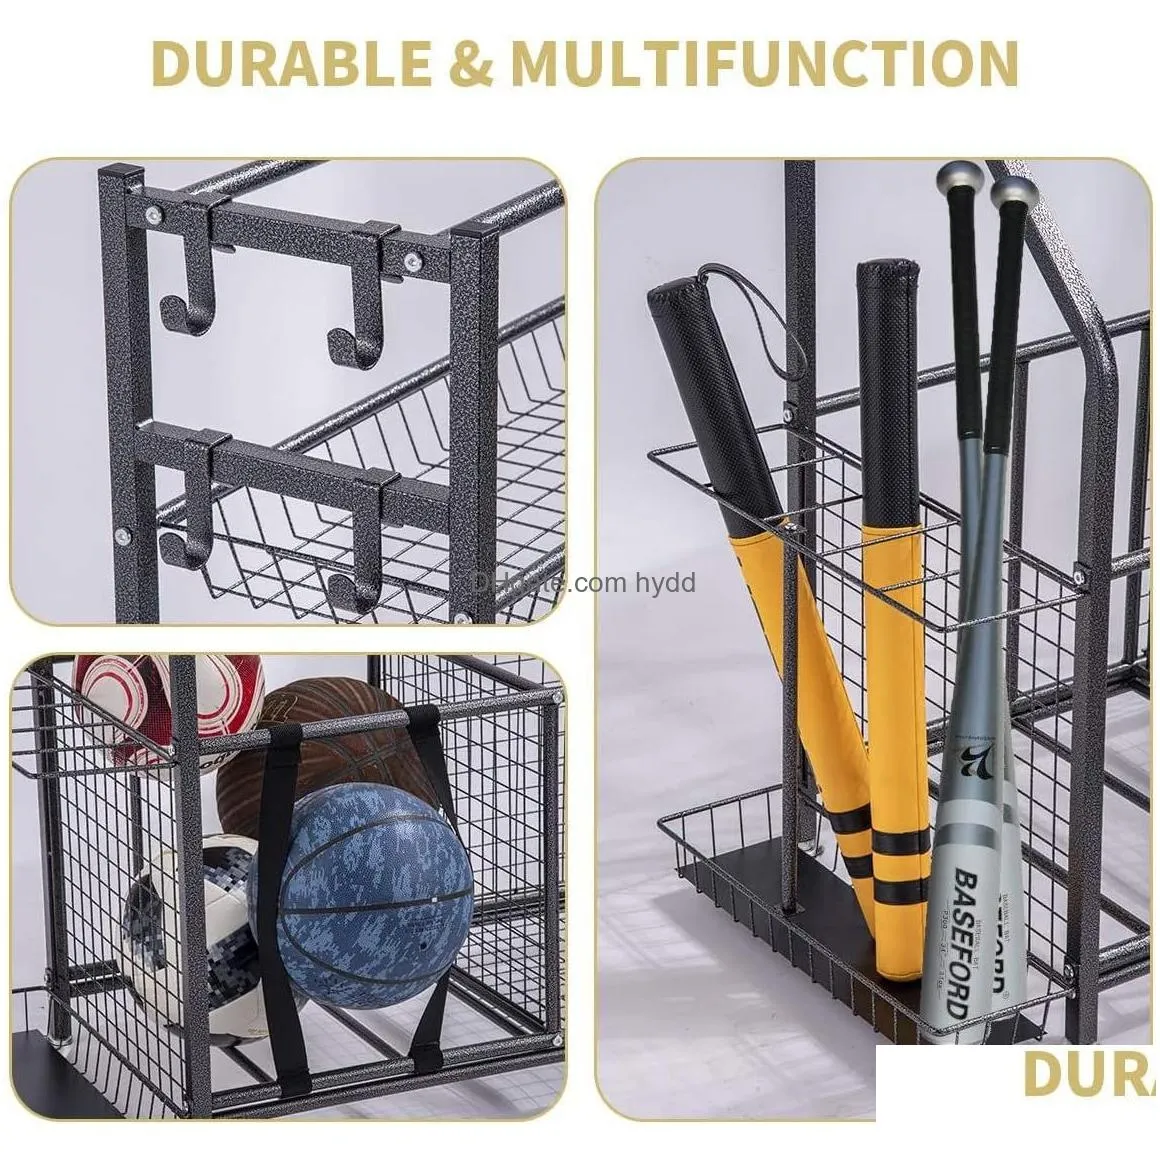 garage sports equipment storage organizer with baskets and hooks - easy to assemble - sports ball gear rack holds basketballs baseball